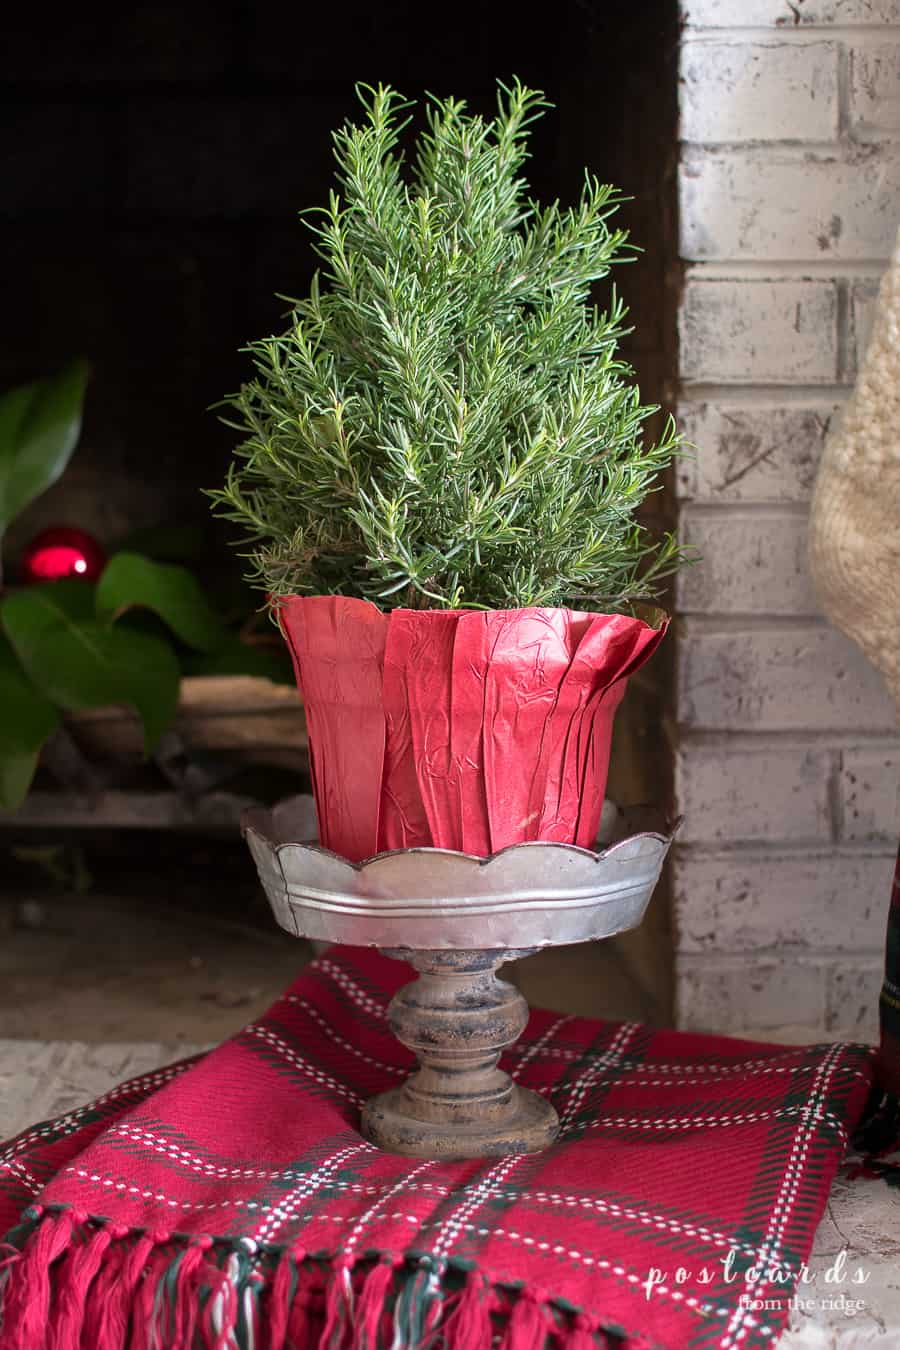 rosemary topiary on pedestal and plaid blanket